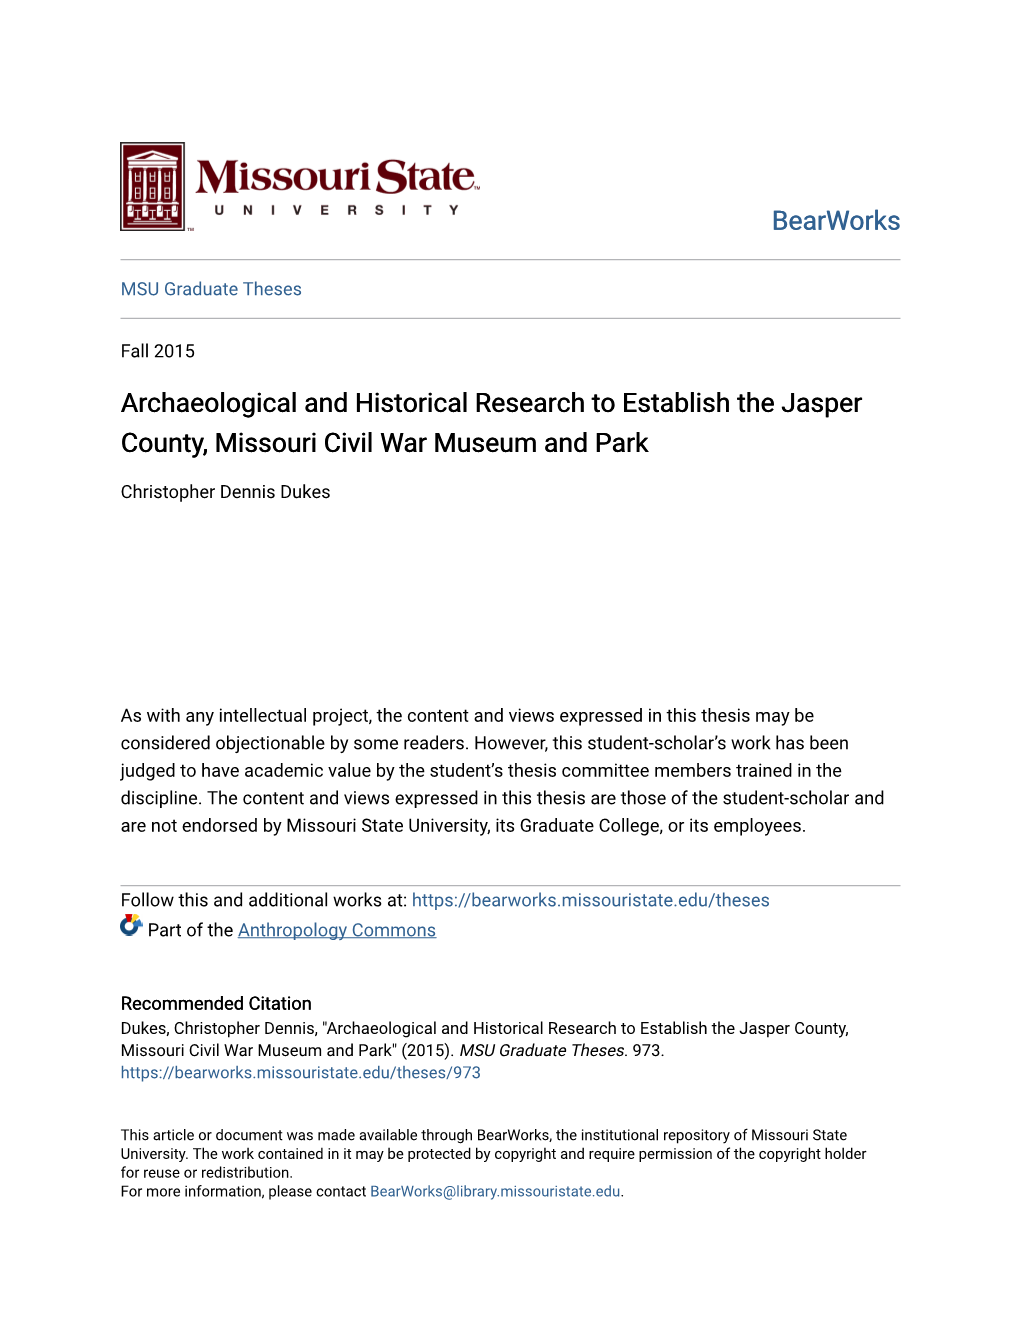 Archaeological and Historical Research to Establish the Jasper County, Missouri Civil War Museum and Park